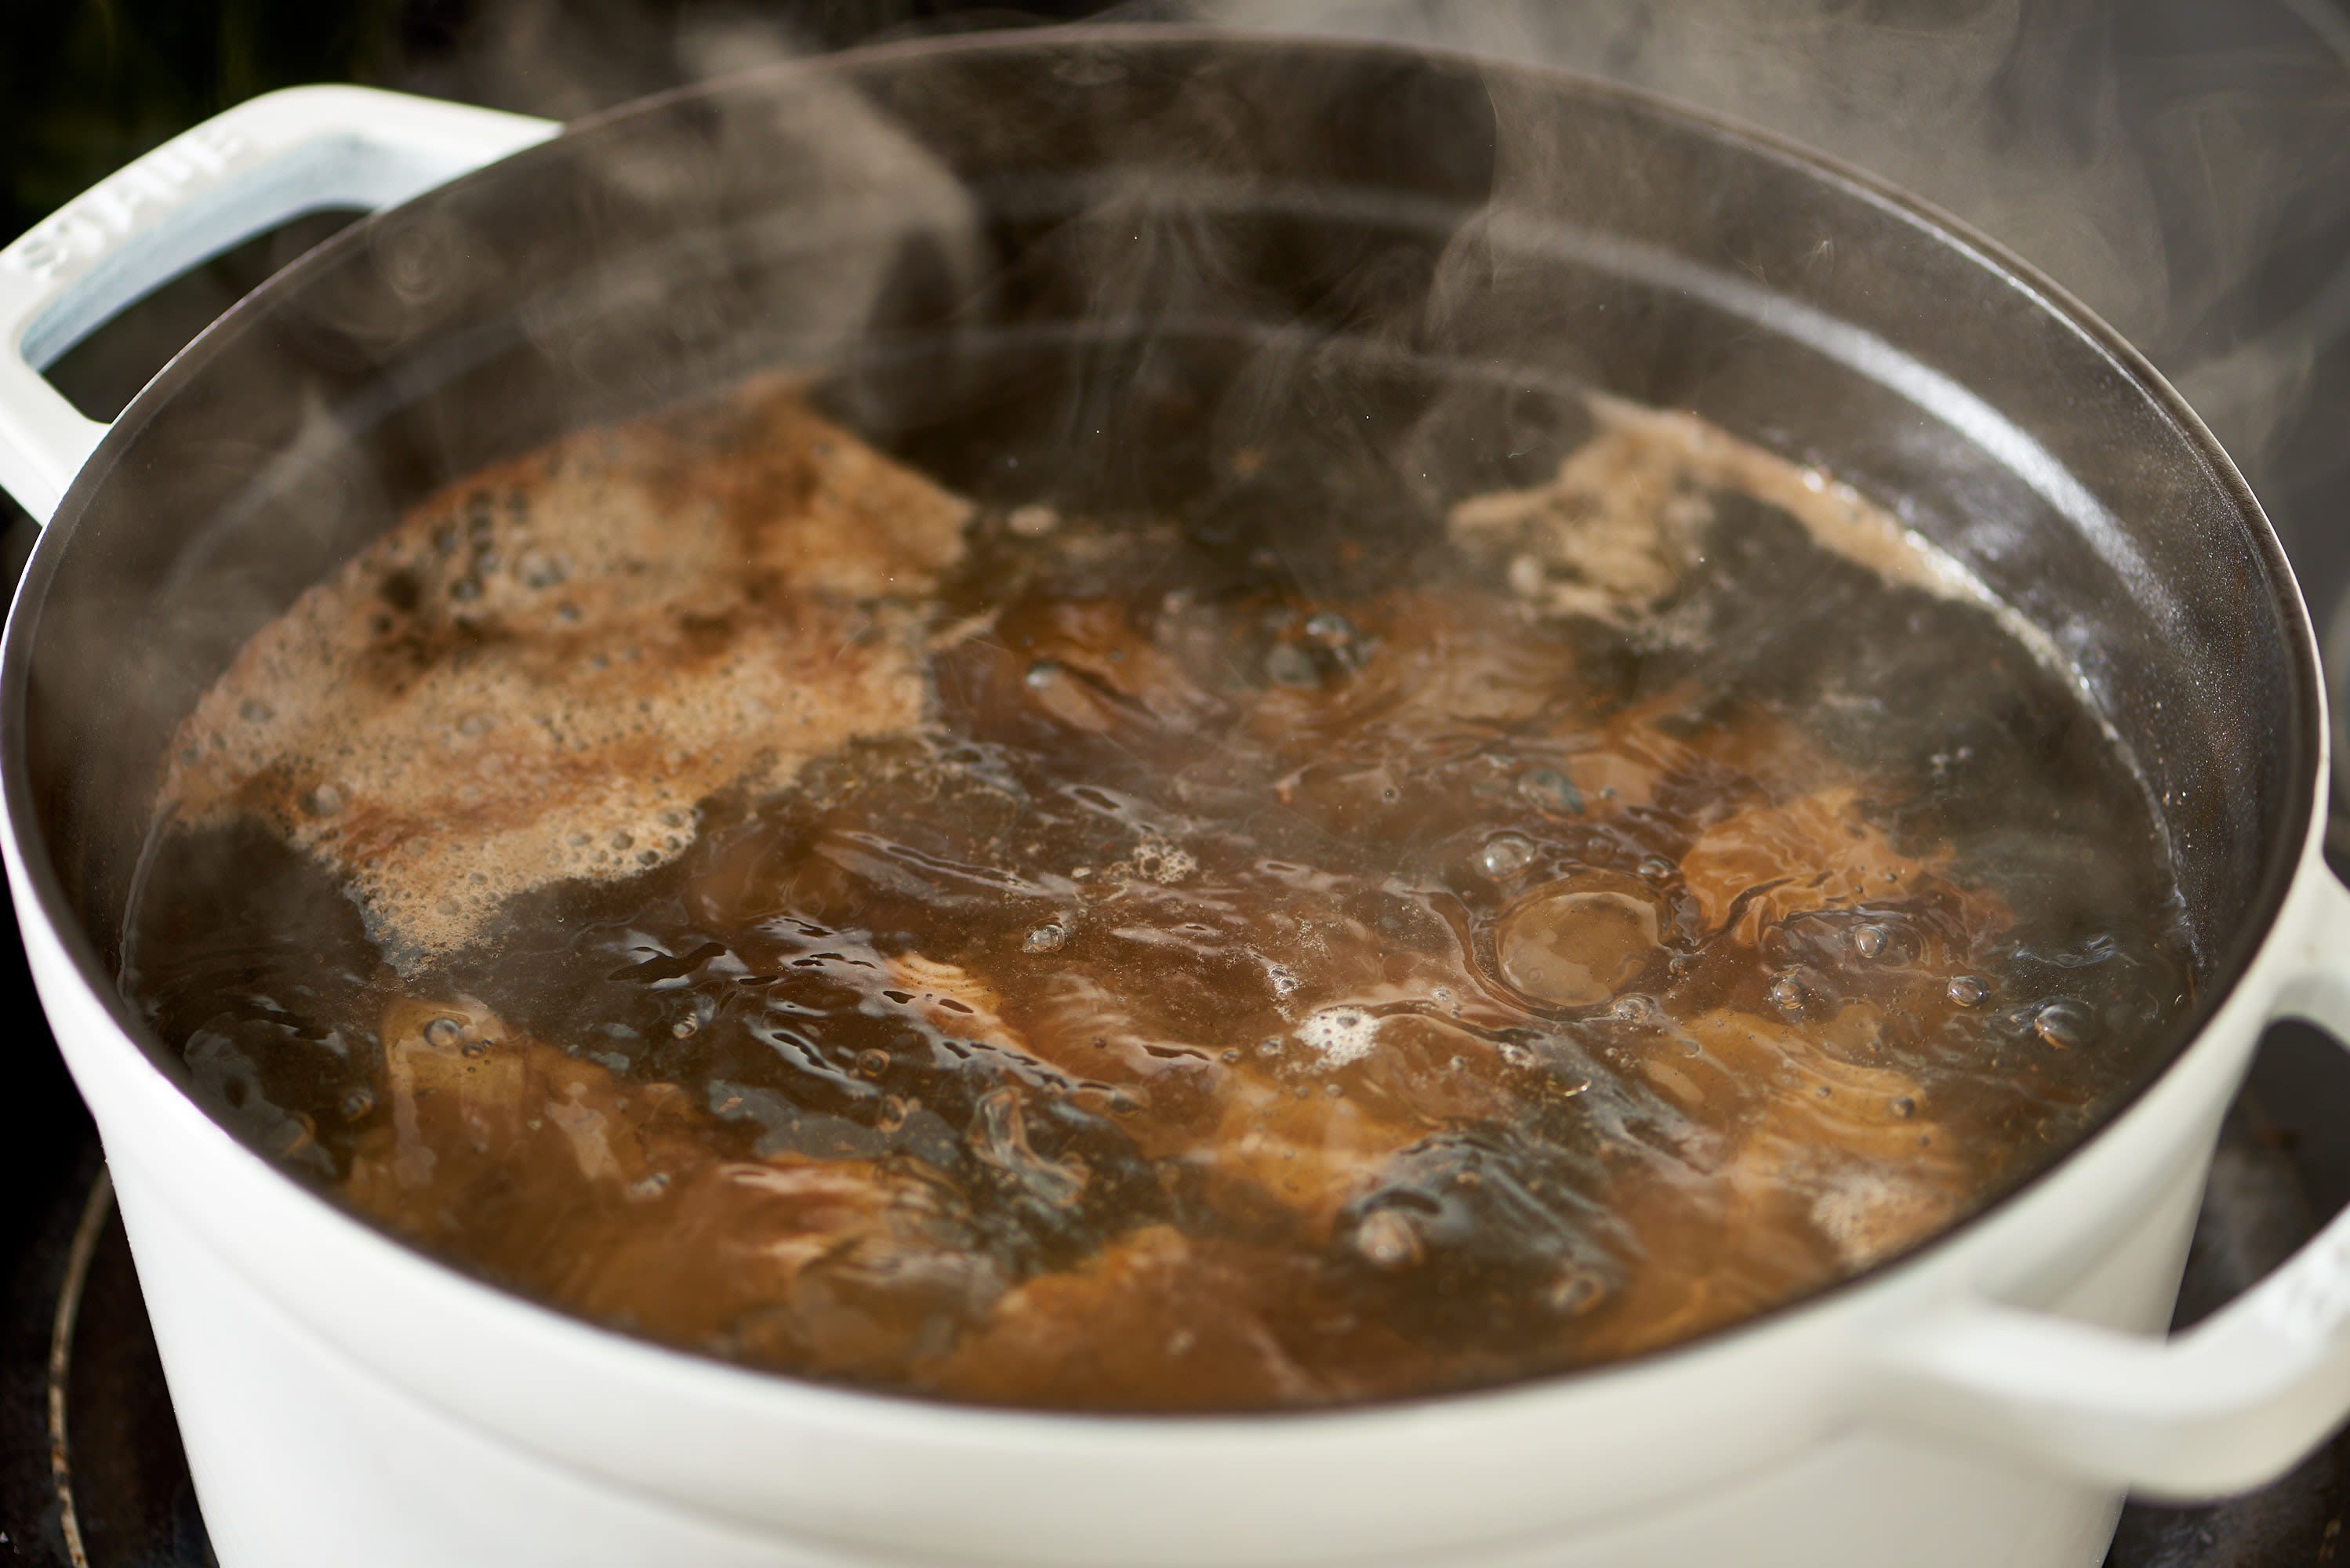 How To Make Bone Broth on the Stove or in the Slow Cooker